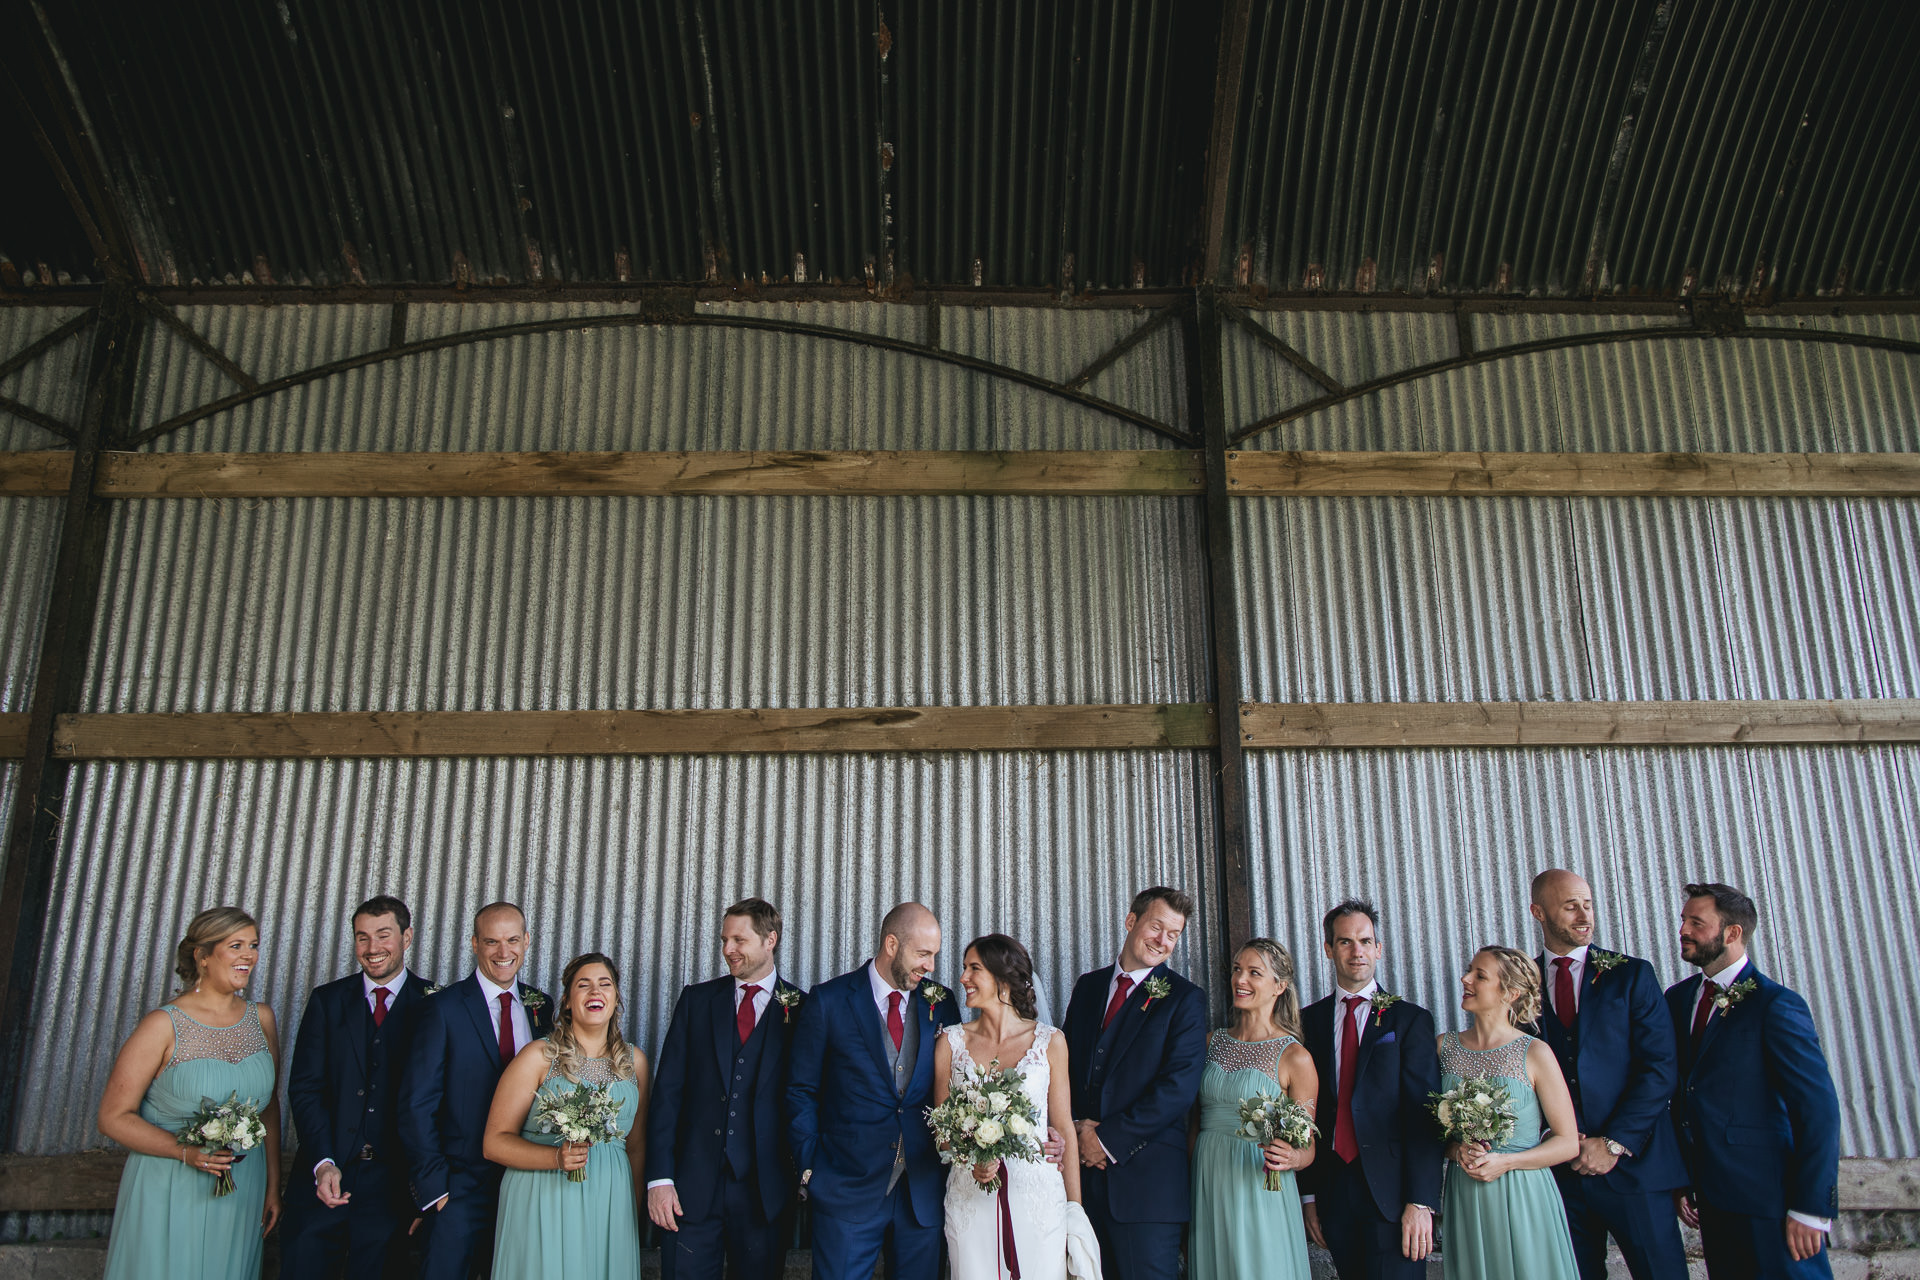 Bridal party group photo in a barn